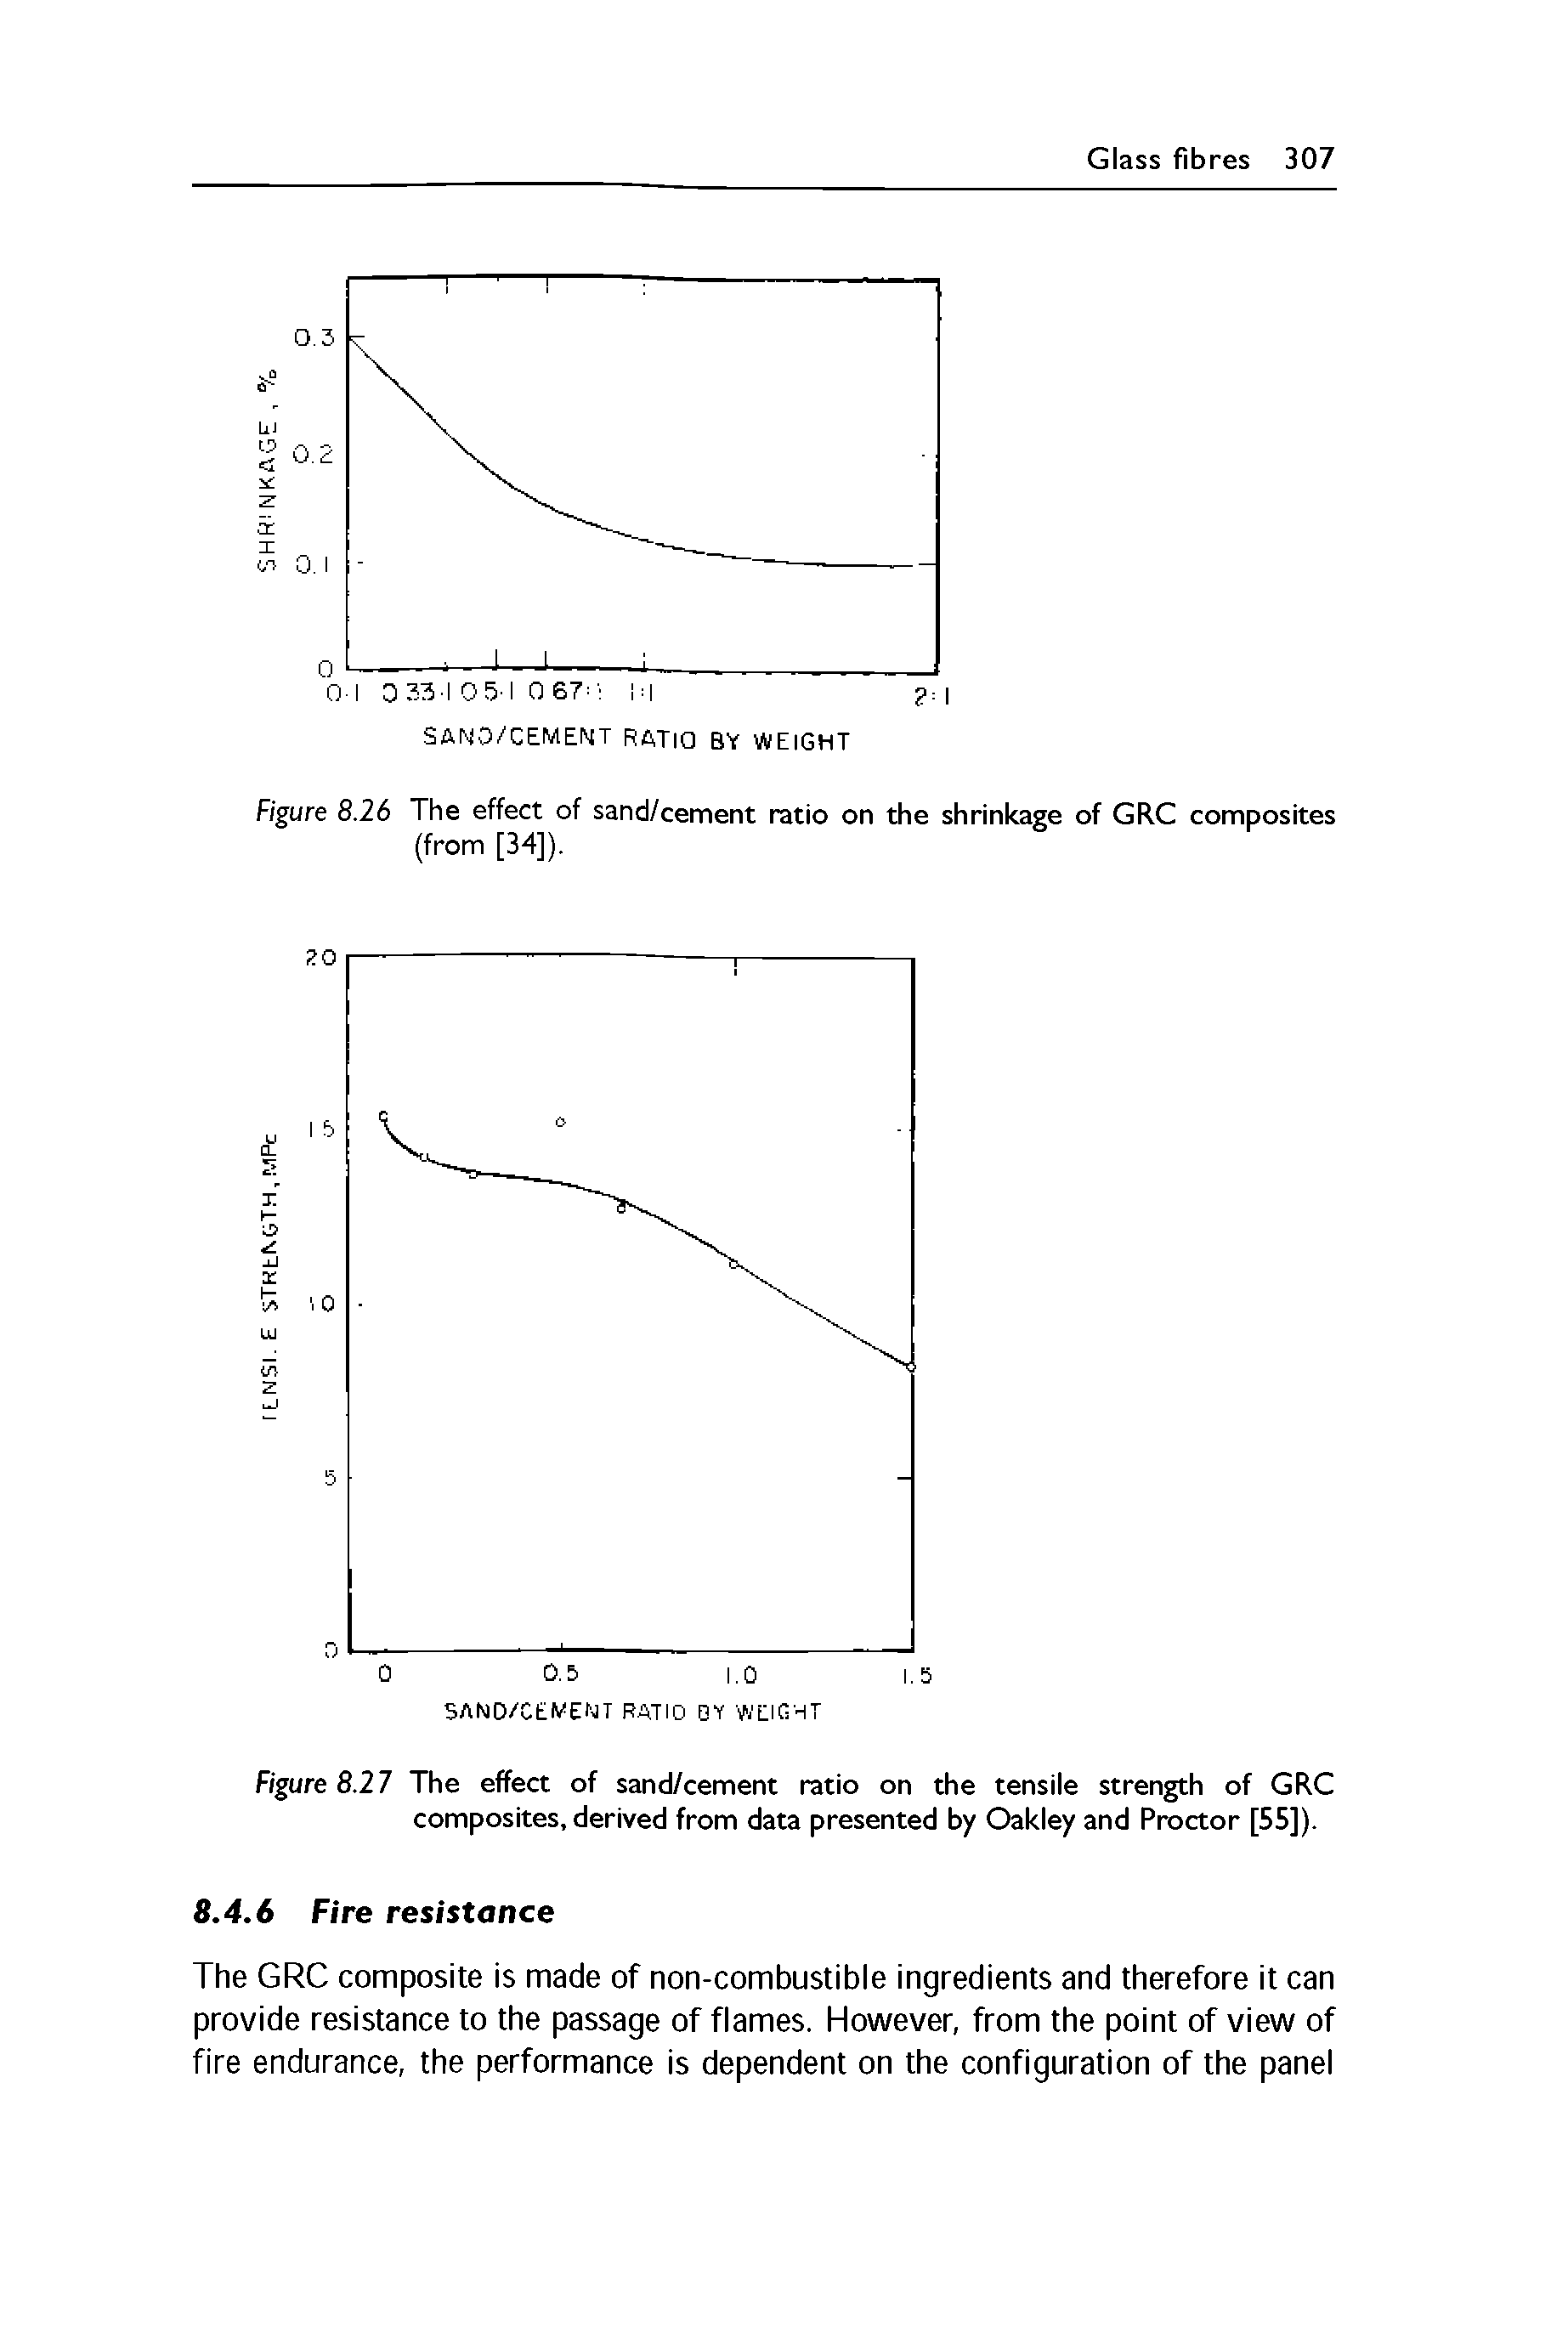 Figure 8.26 The effect of sand/cement ratio on the shrinkage of GRC composites (from [34]).